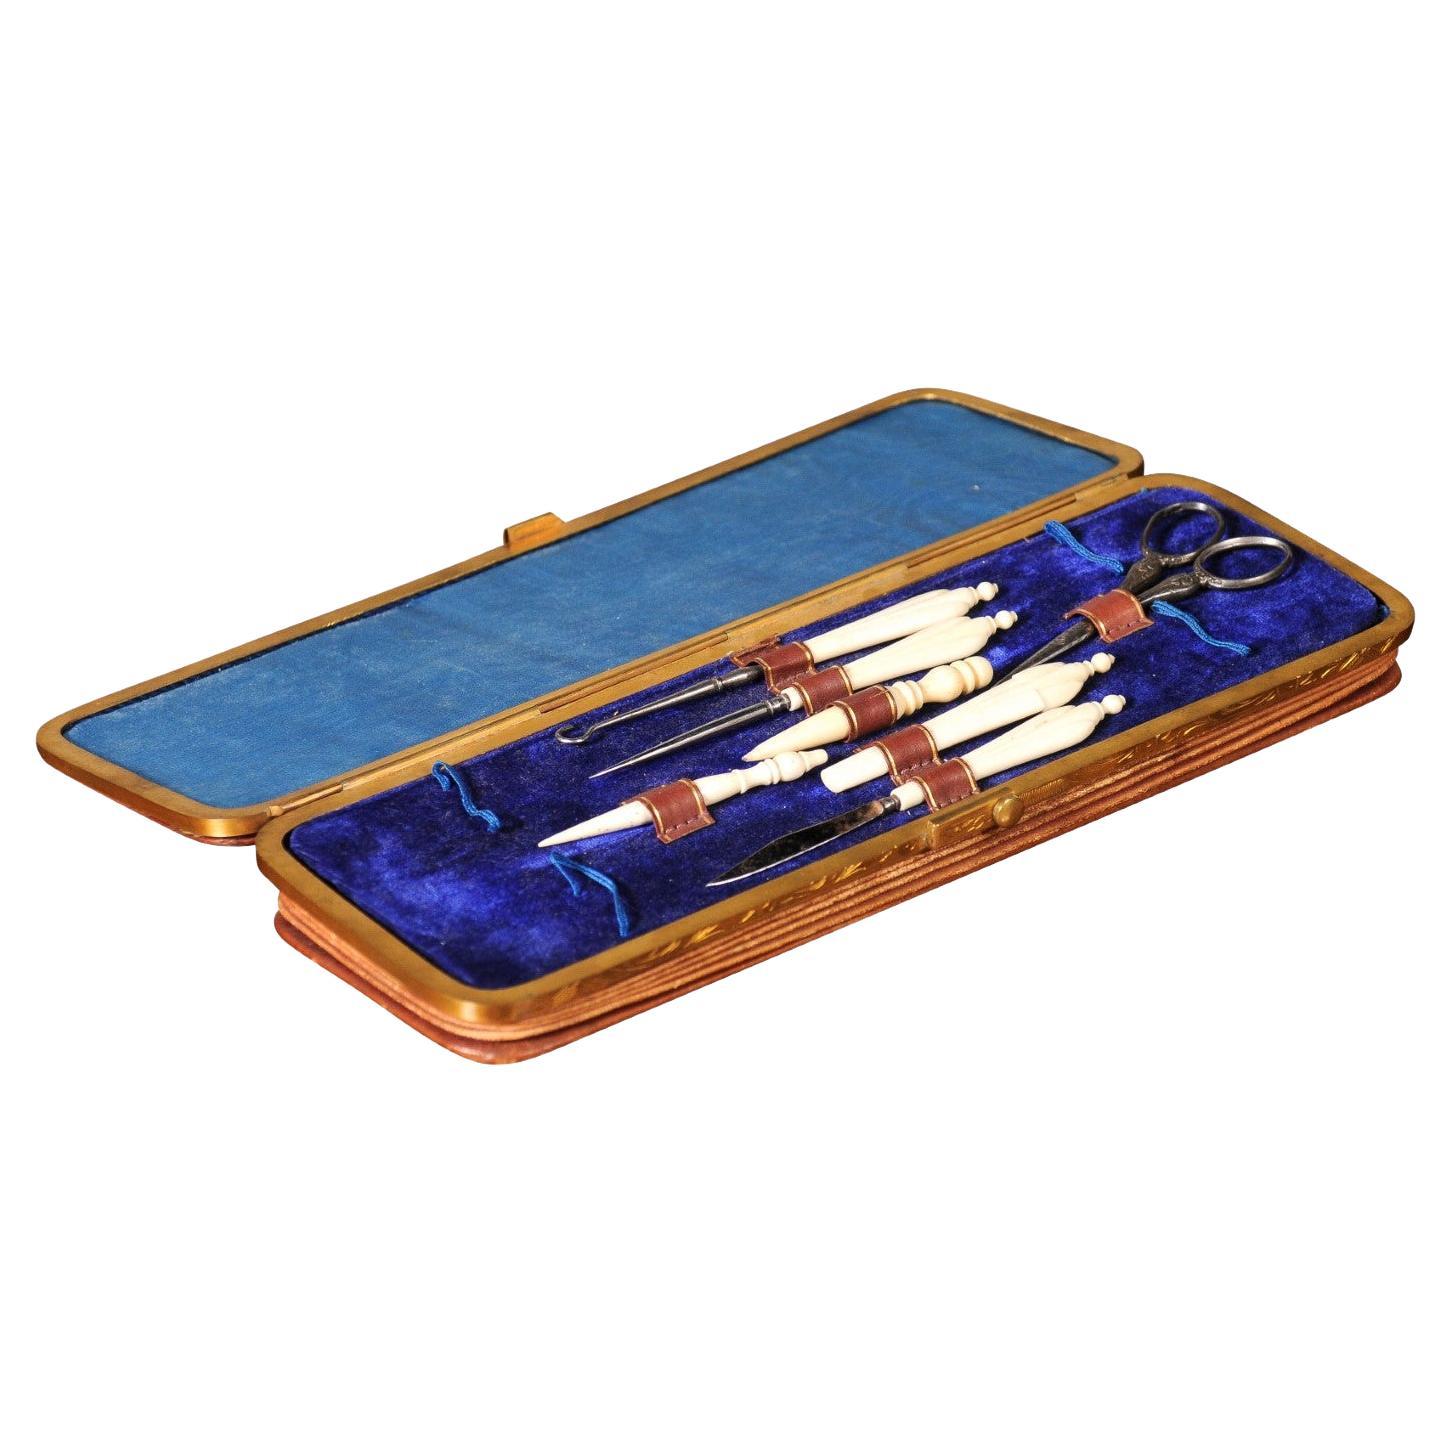 French Napoleon III Period 19th Century Leather Sewing Kit with